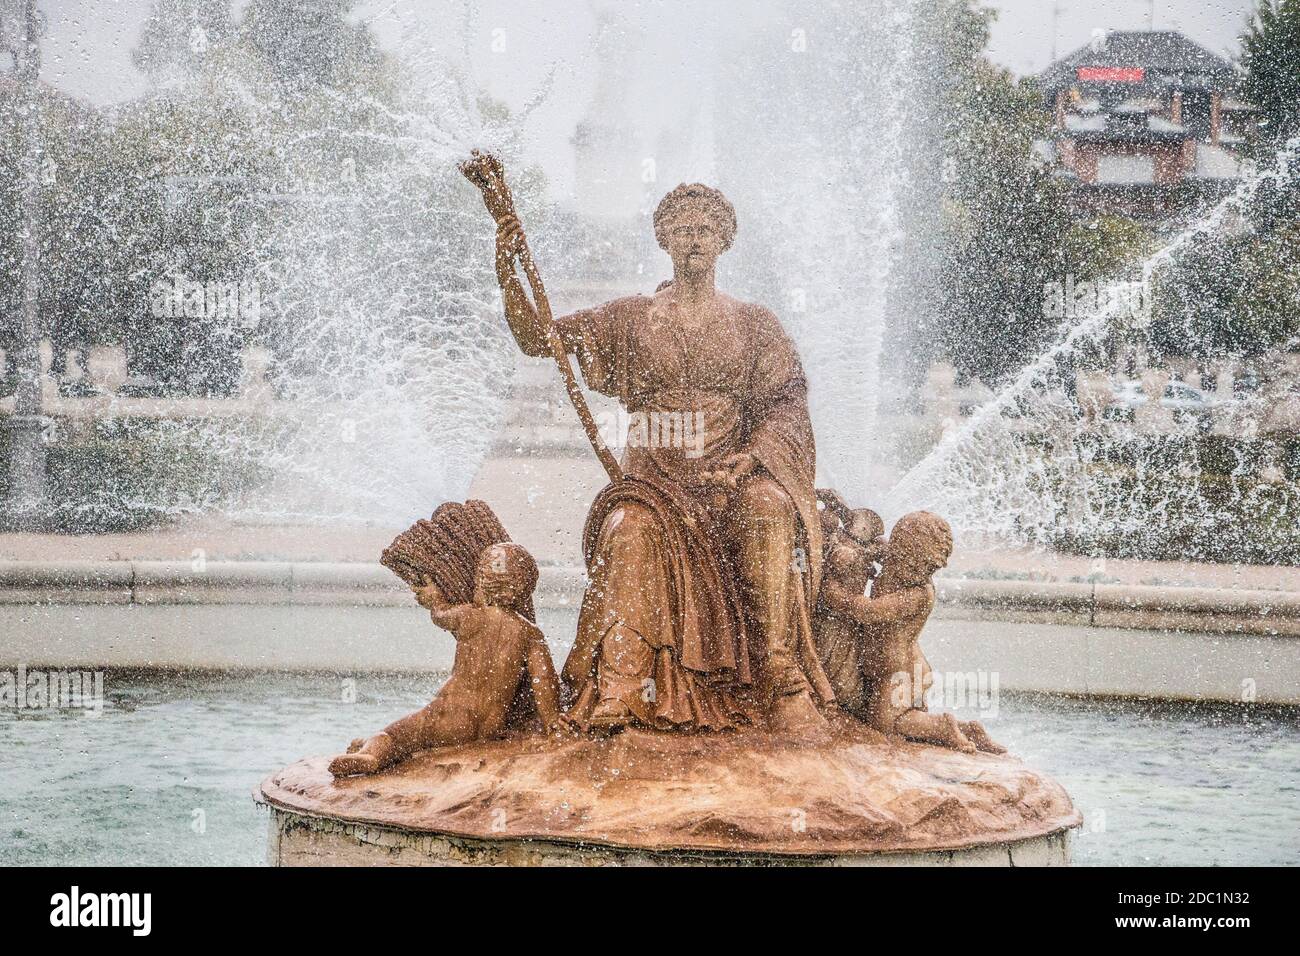 Fountain of Cerchildrenes, Garden del Parterre at the Royal Palace, Aranjuez, Spain Stock Photo